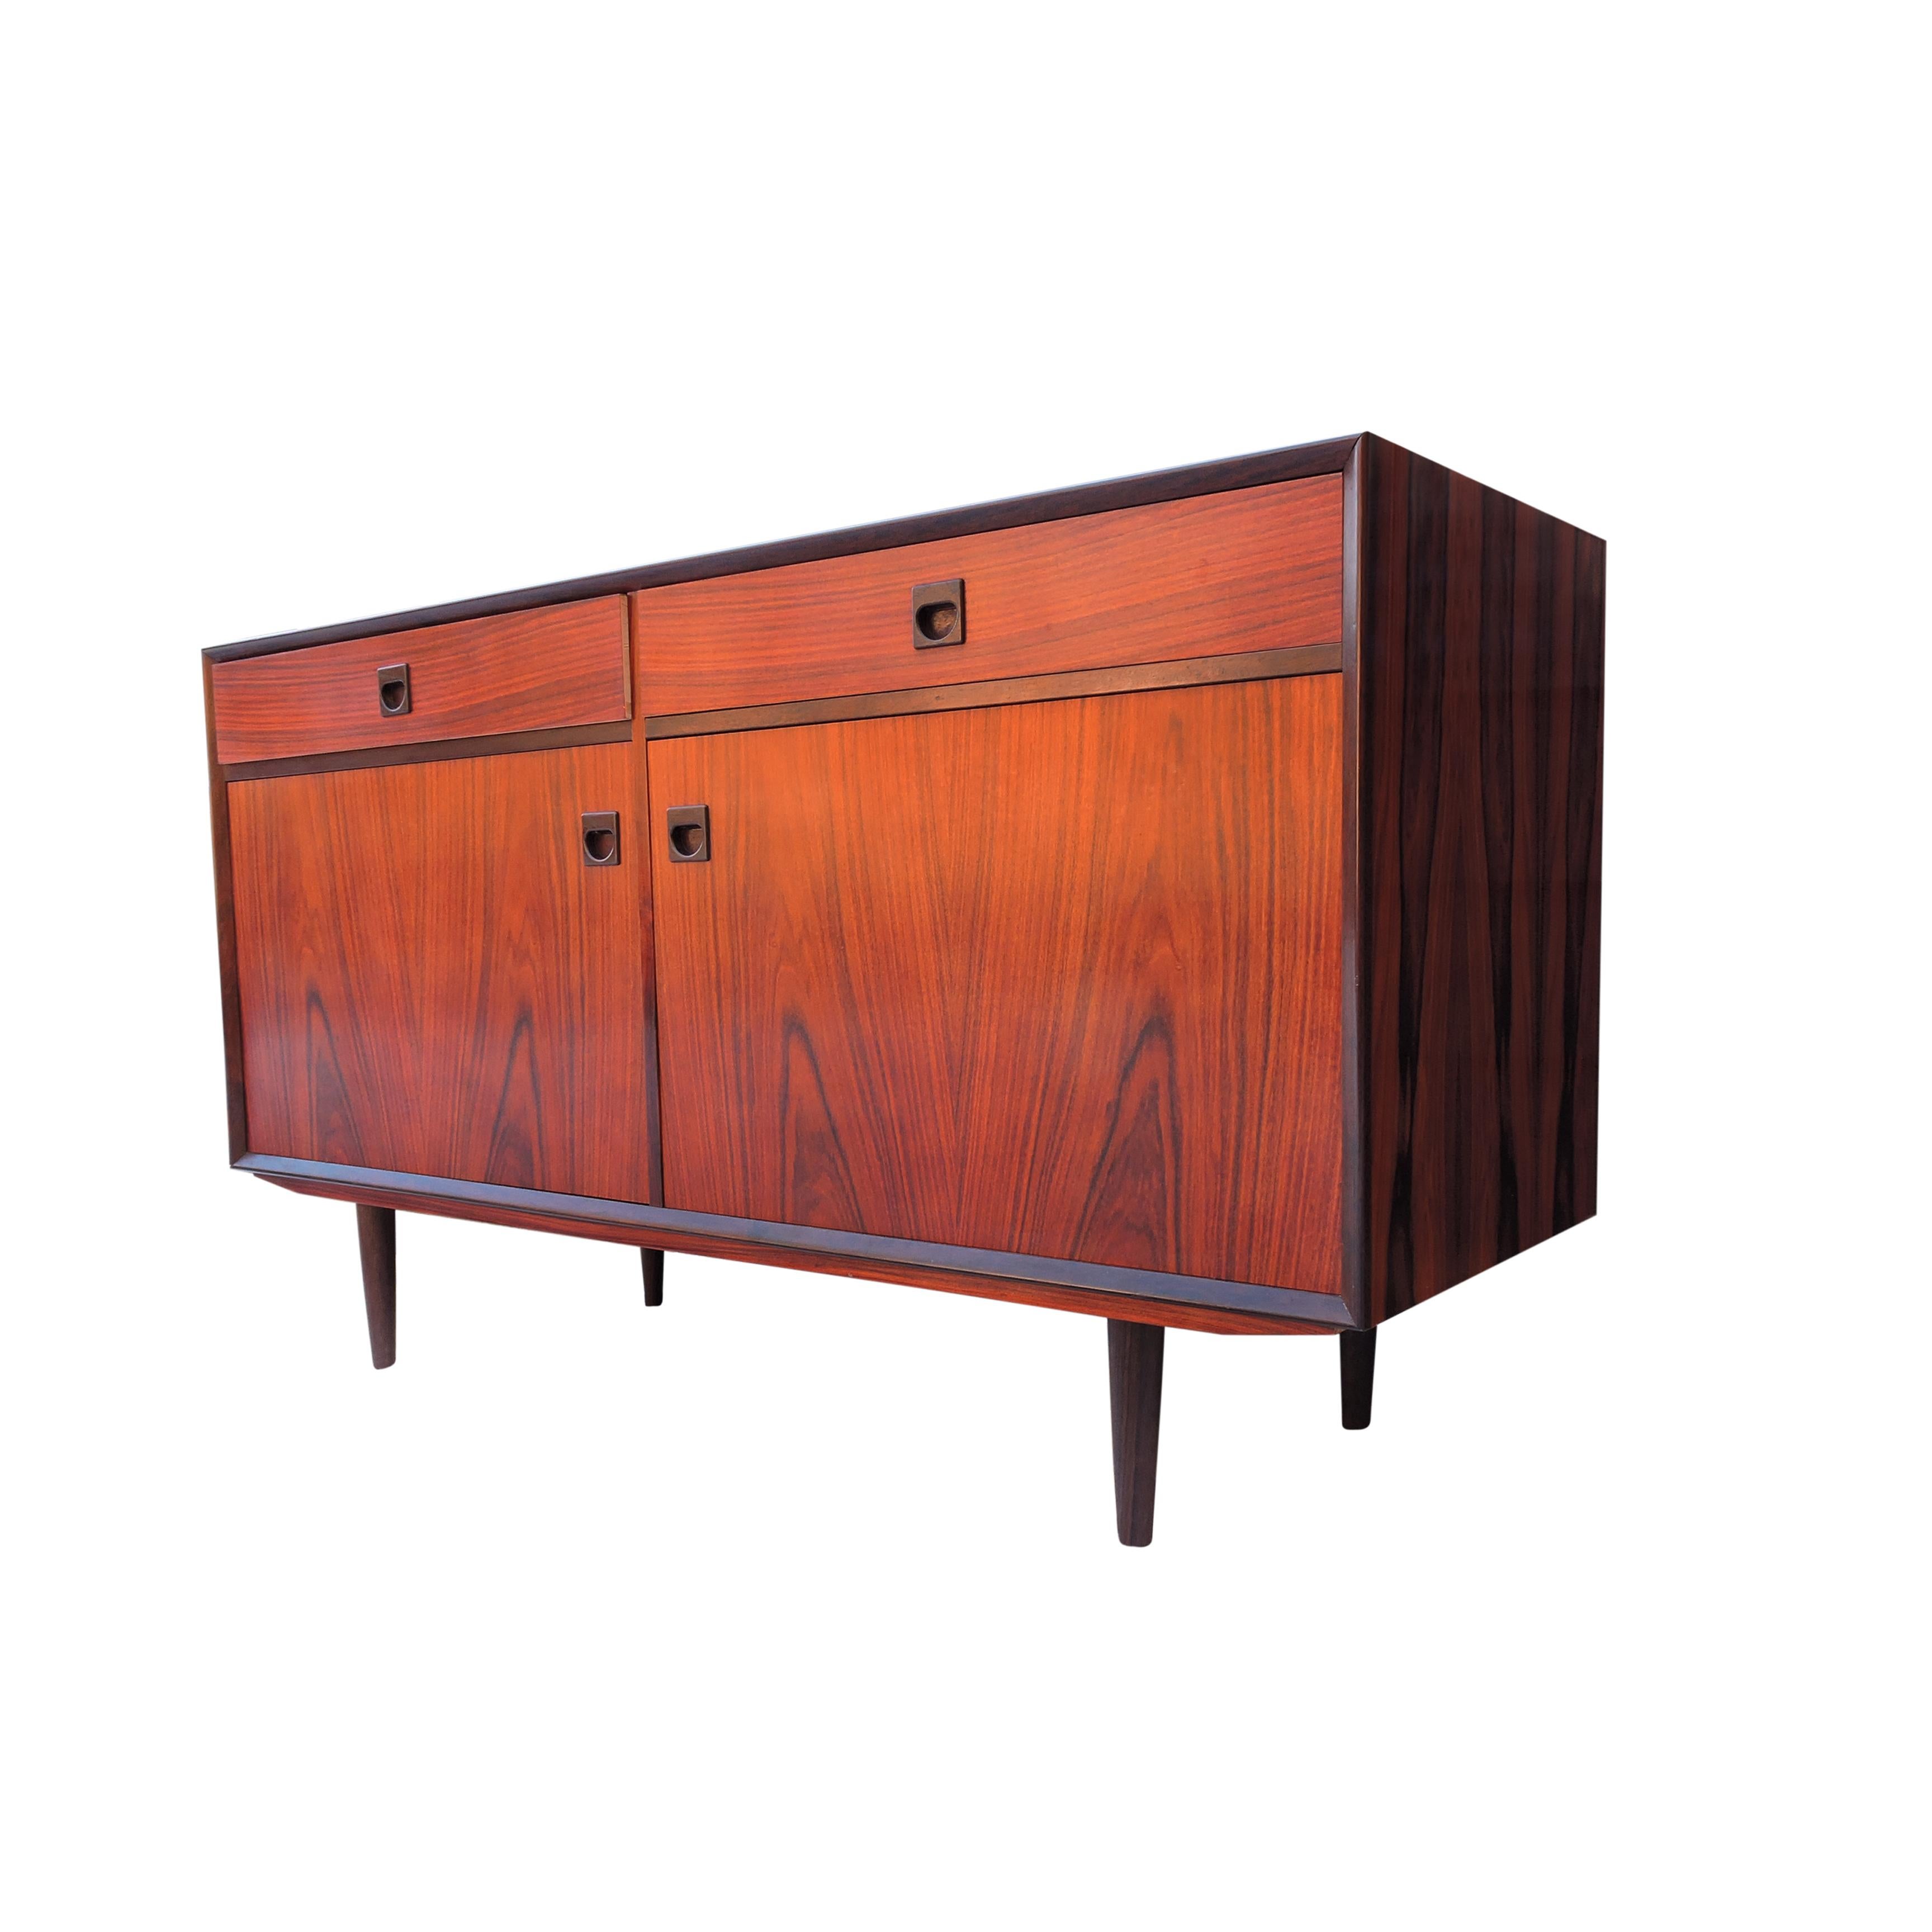 A rosewood sideboard featuring 2 drawers and 2 doors with inlayed handles.
 